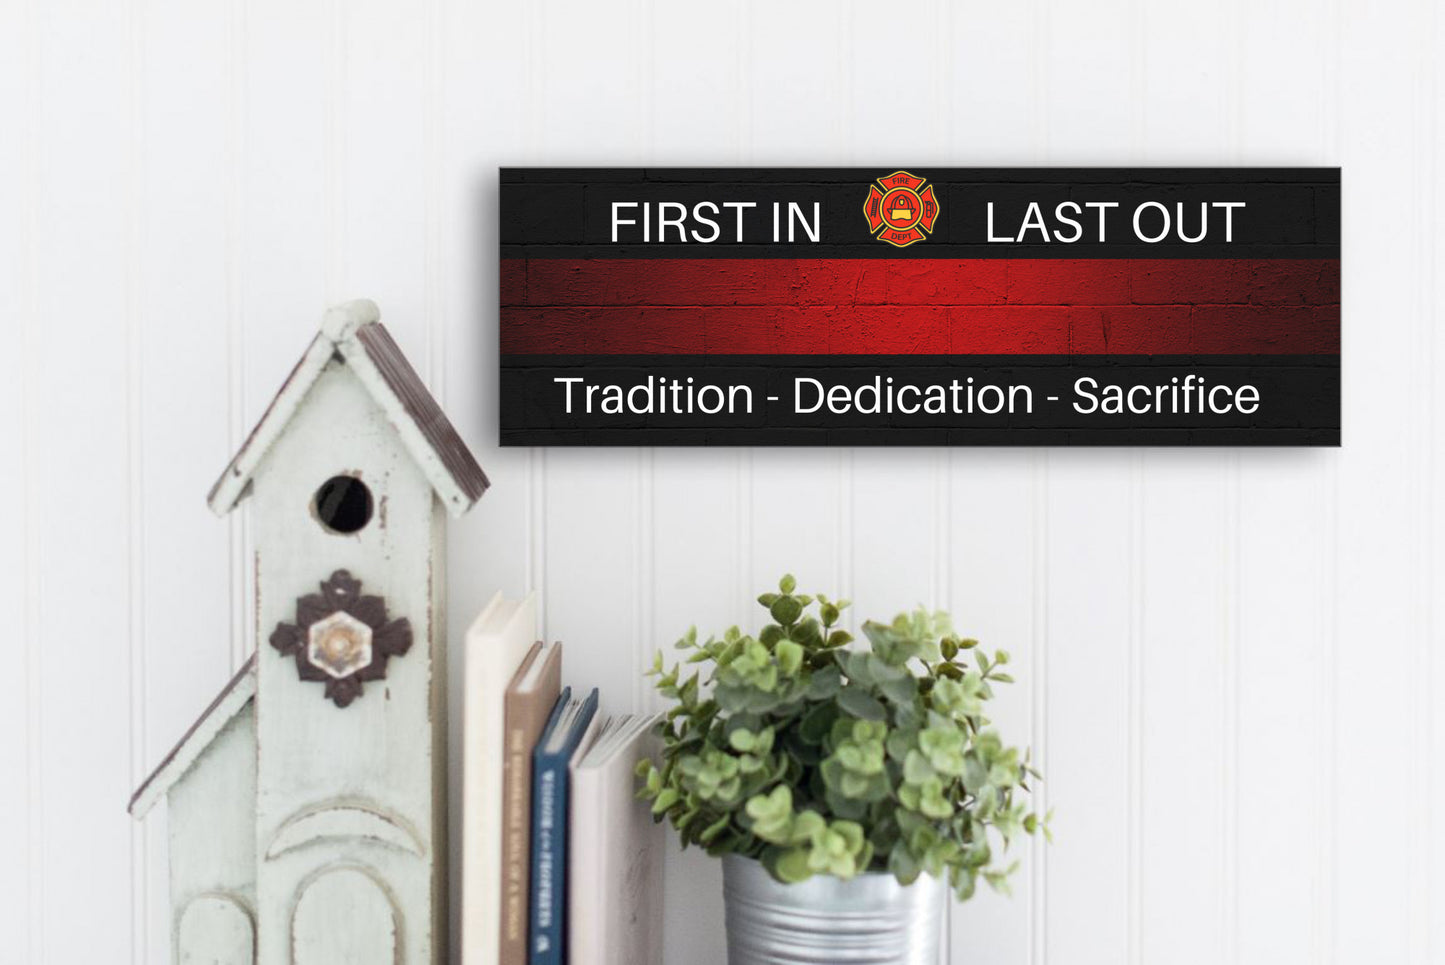 First In Last Out Firefighter Thin Red Line Wall Sign or Table Display Tradition - Dedication - Sacrifice